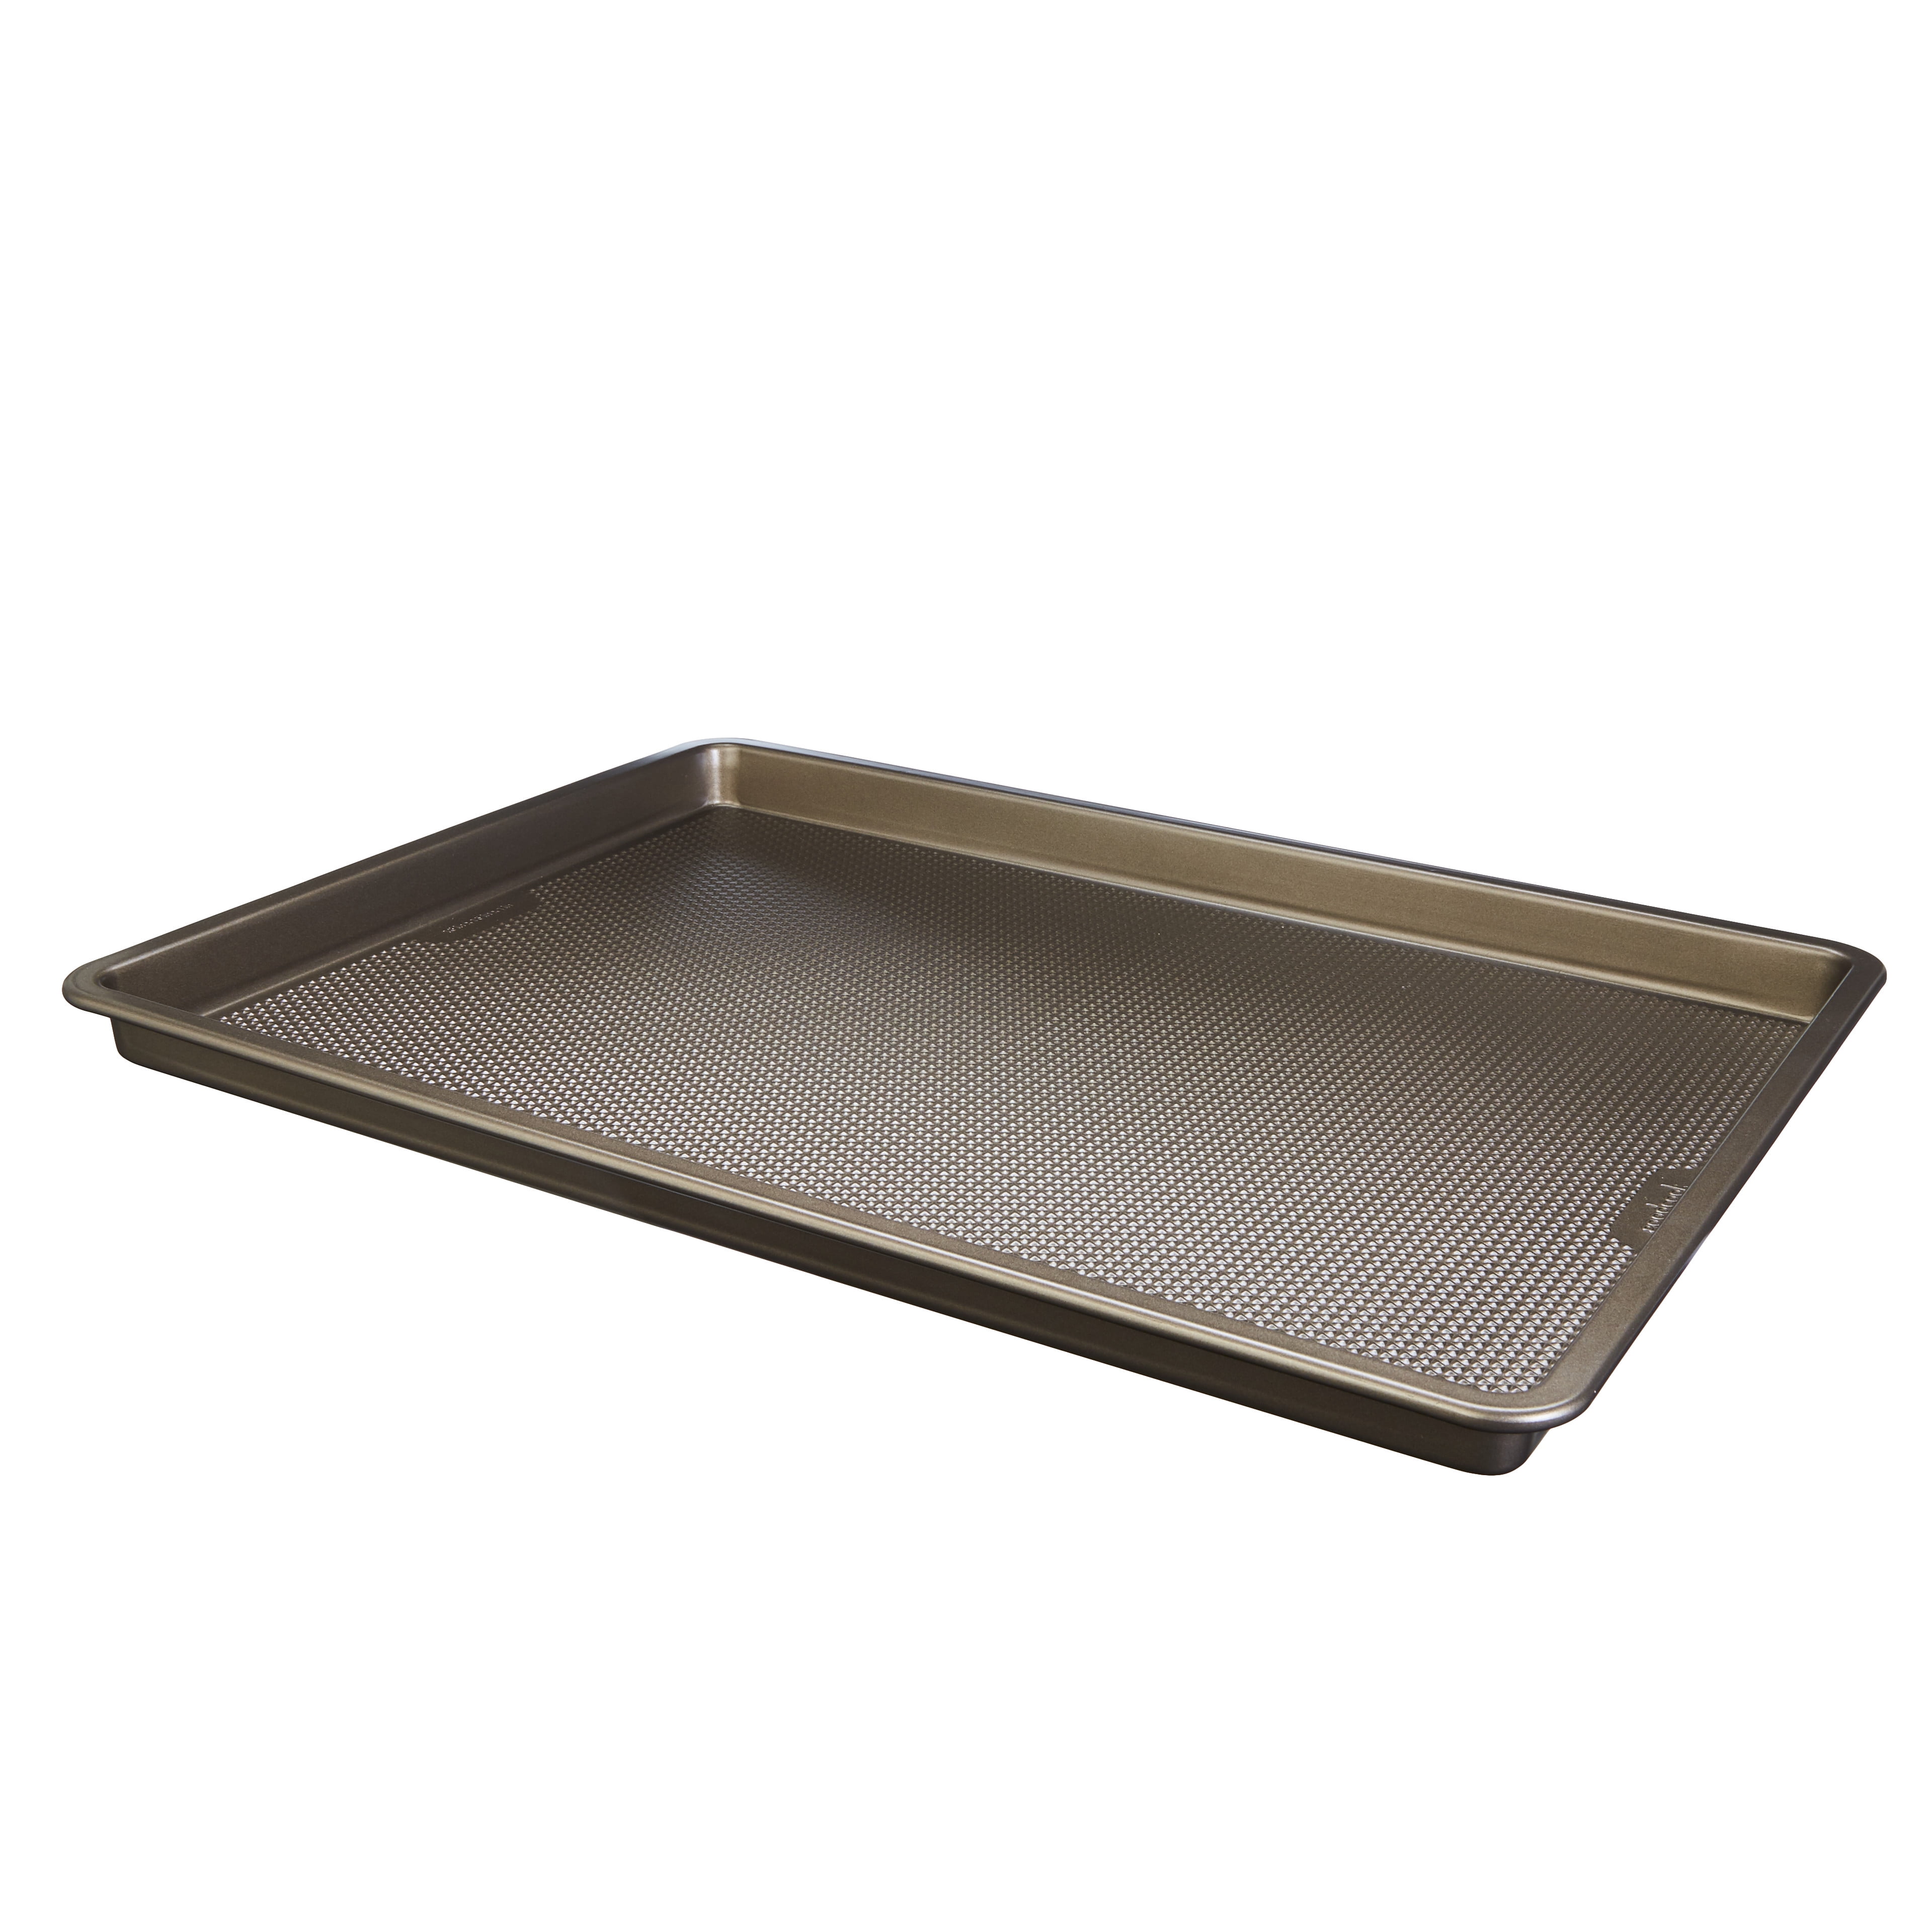 Glad Premium Nonstick Cookie Sheet – Heavy Duty Baking Pan with Raised  Diamond Texture, Small, Gold